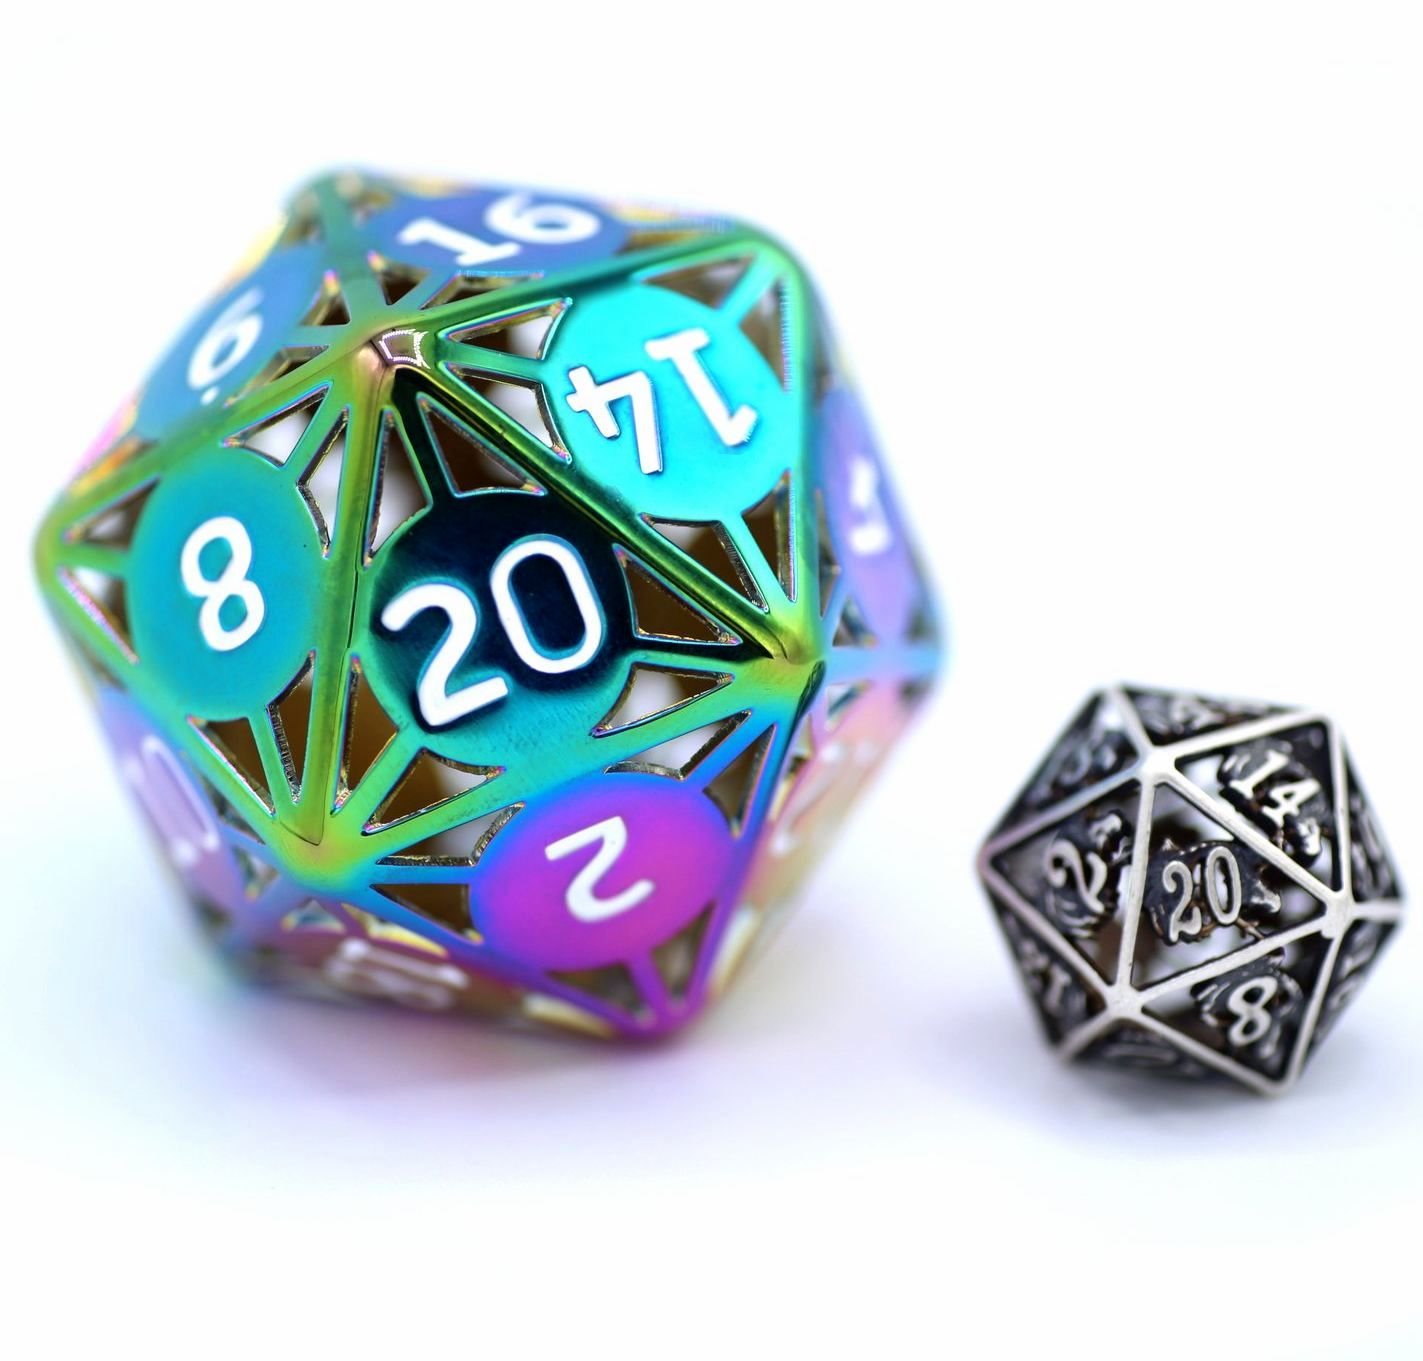 Classic Atomic Dice Giant Hollow Prism 55MM D20 - HYMGHO Dice 